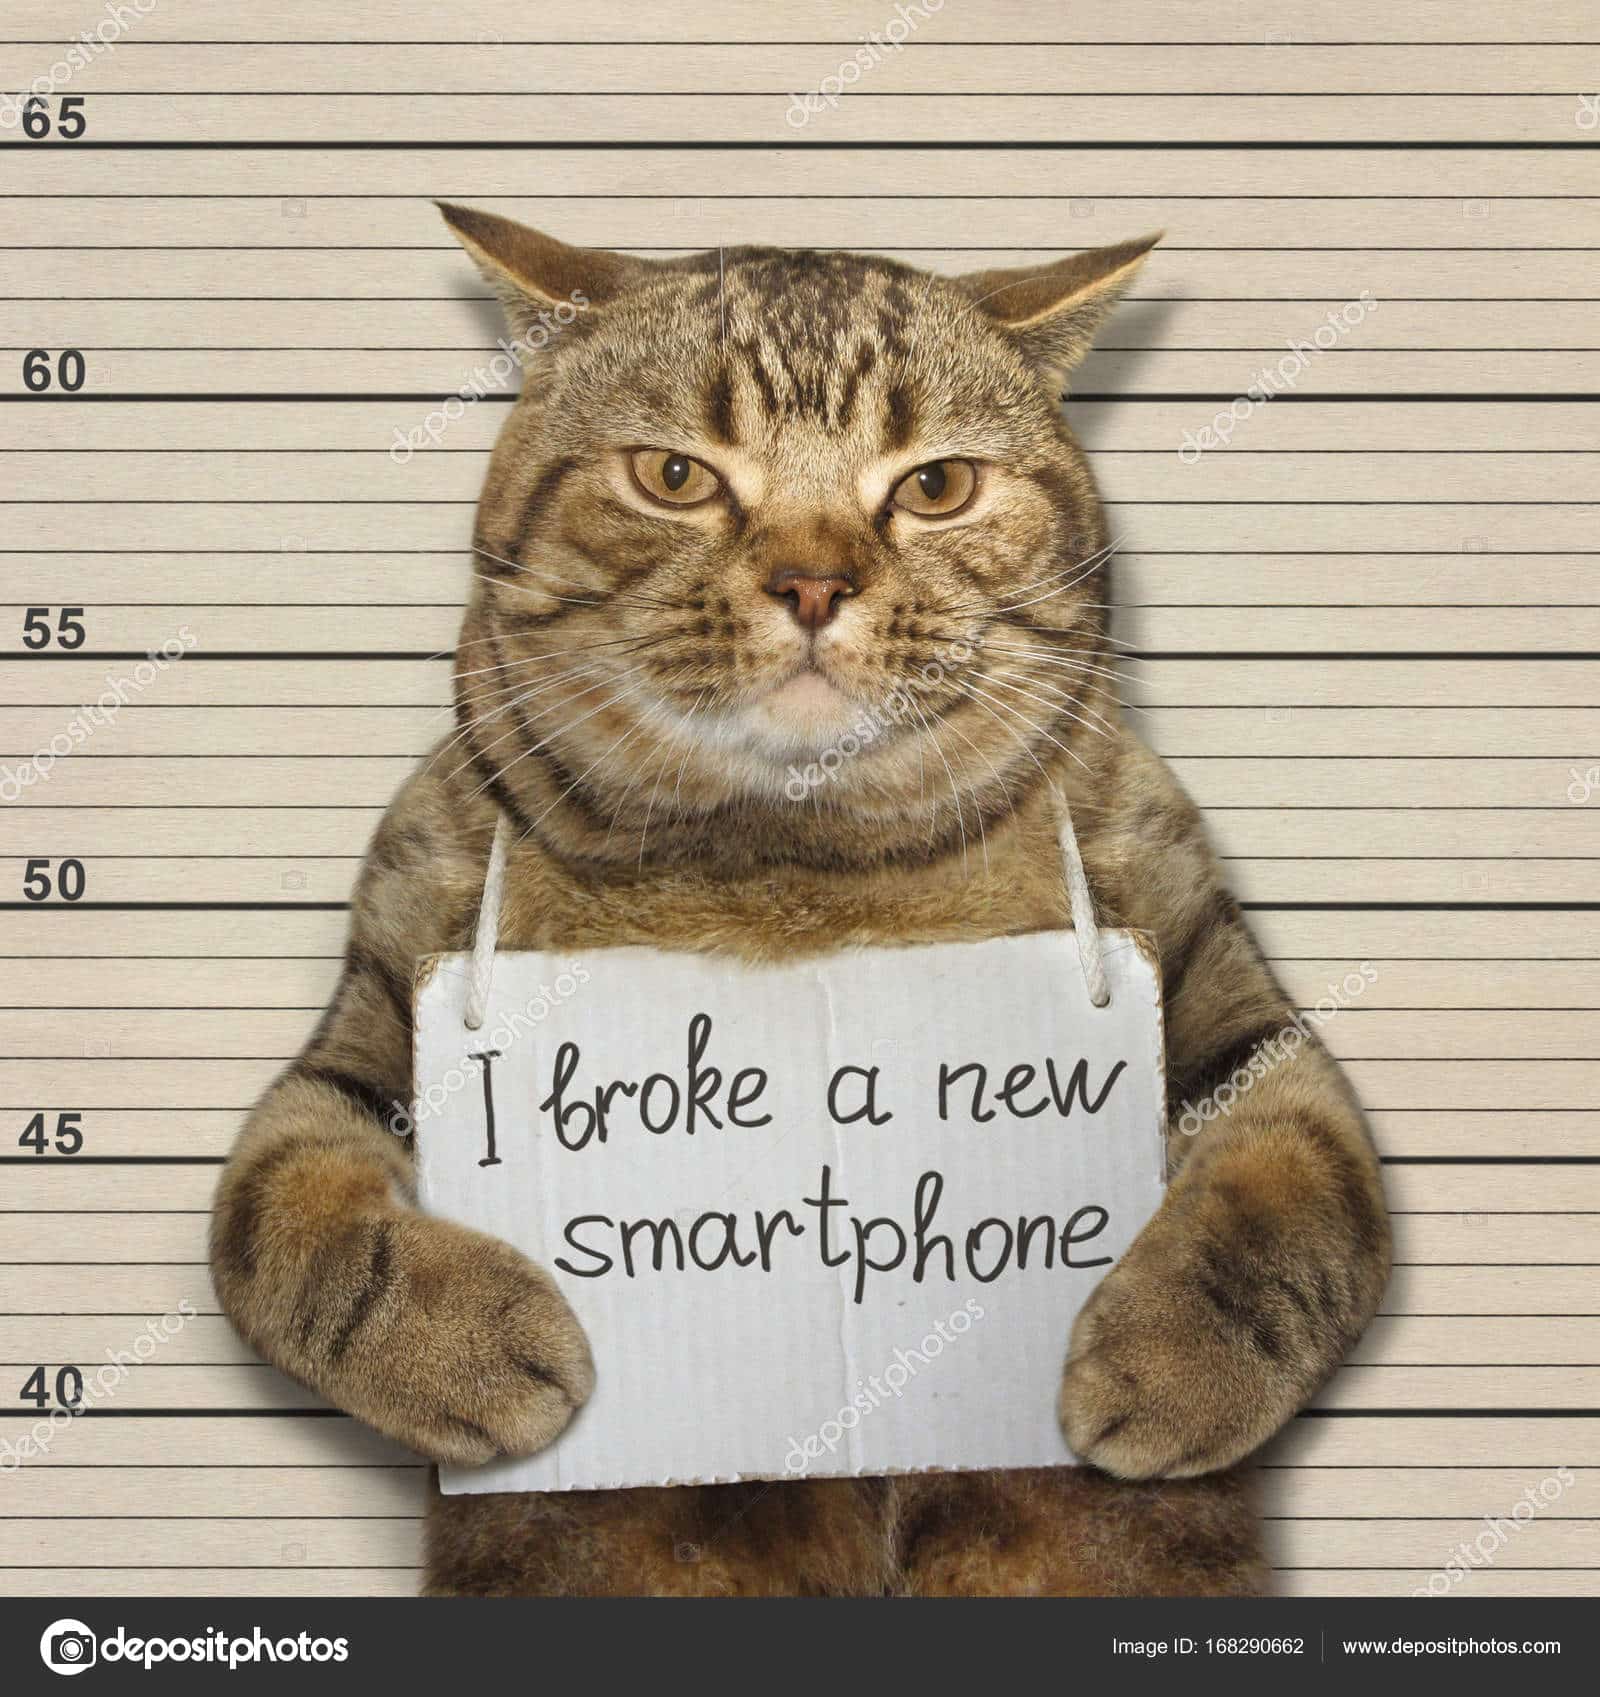 The bad cat broke a new smartphone. He went to prison for it.